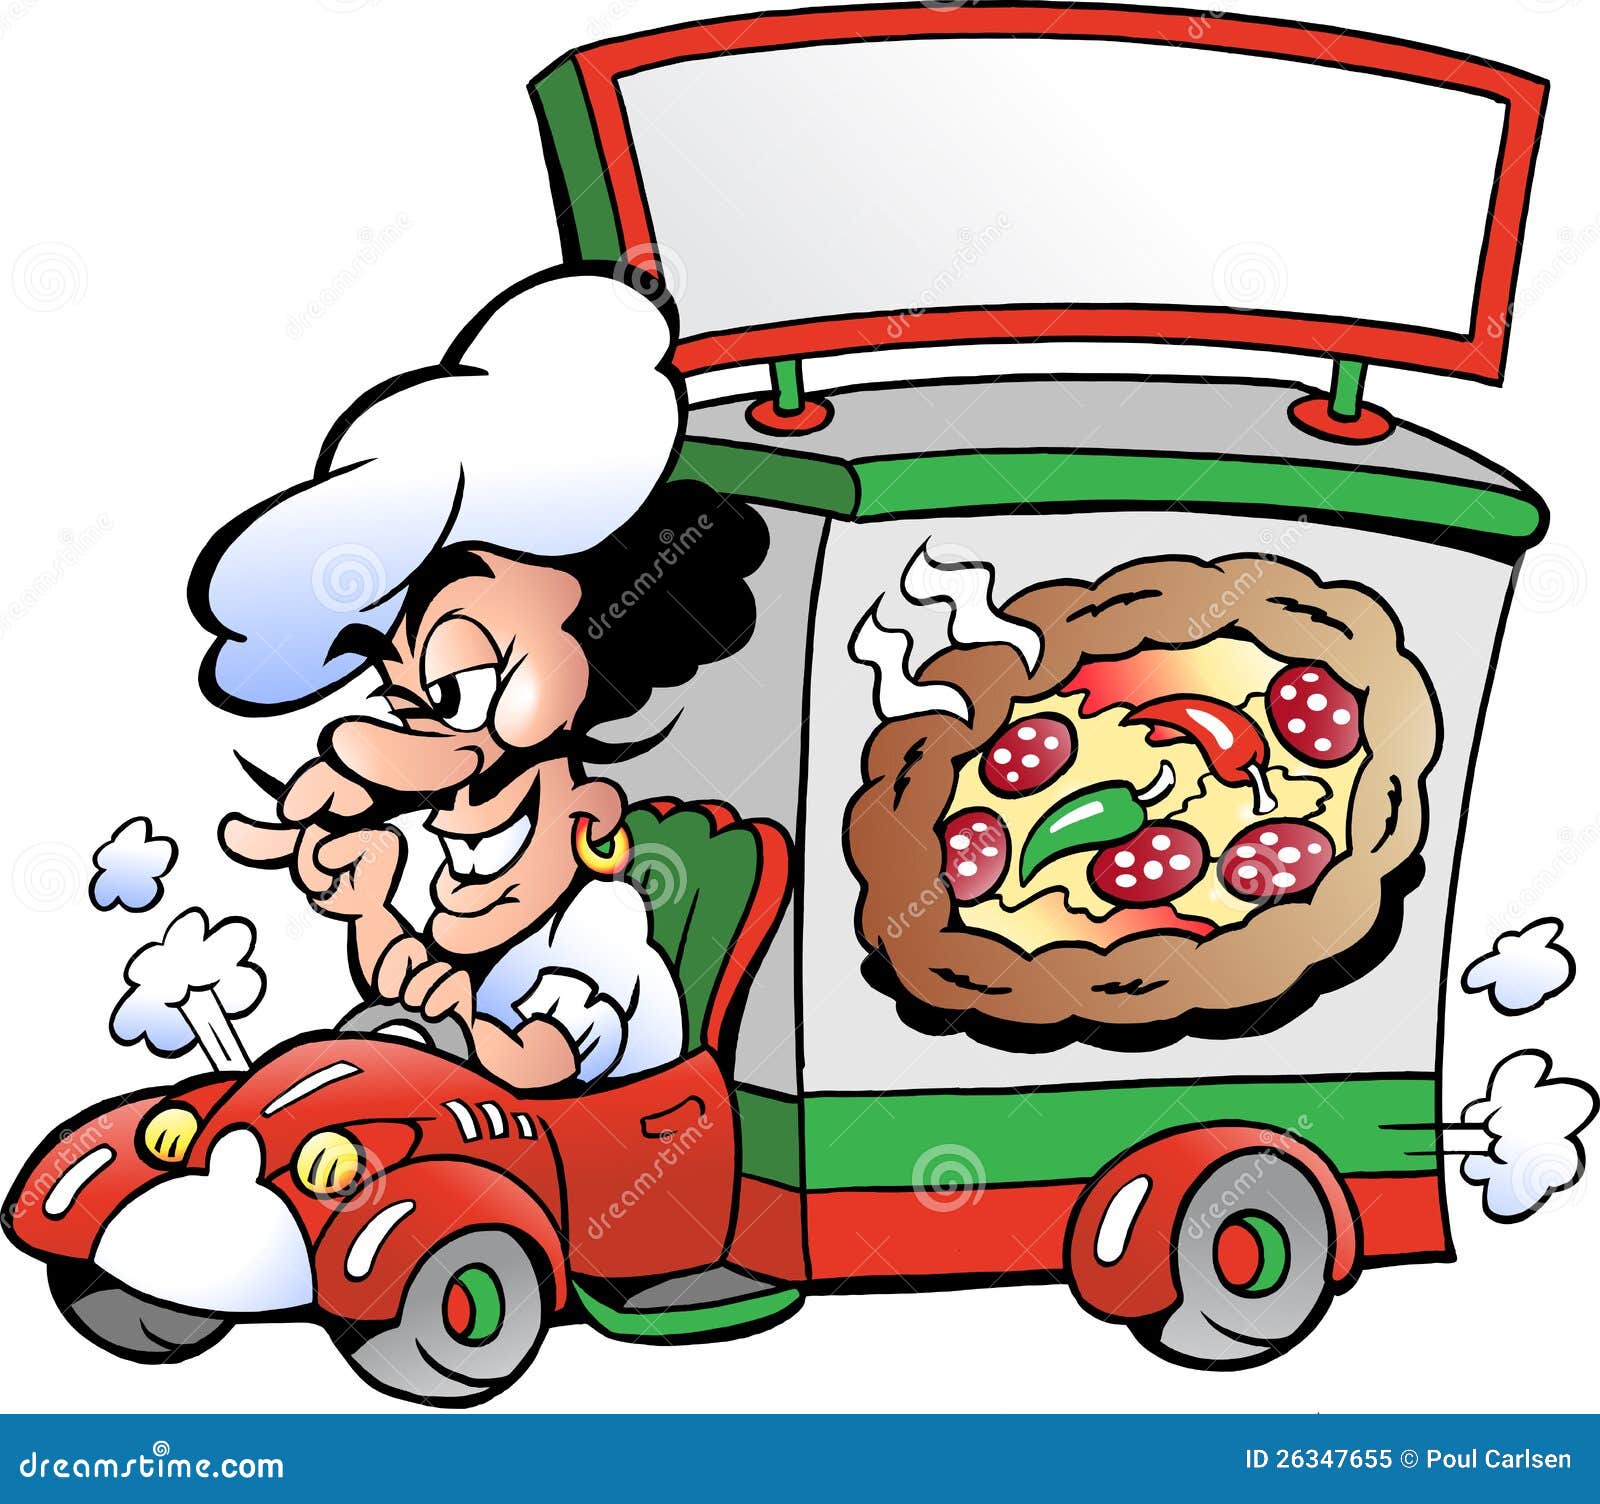 delivery clipart free - photo #26